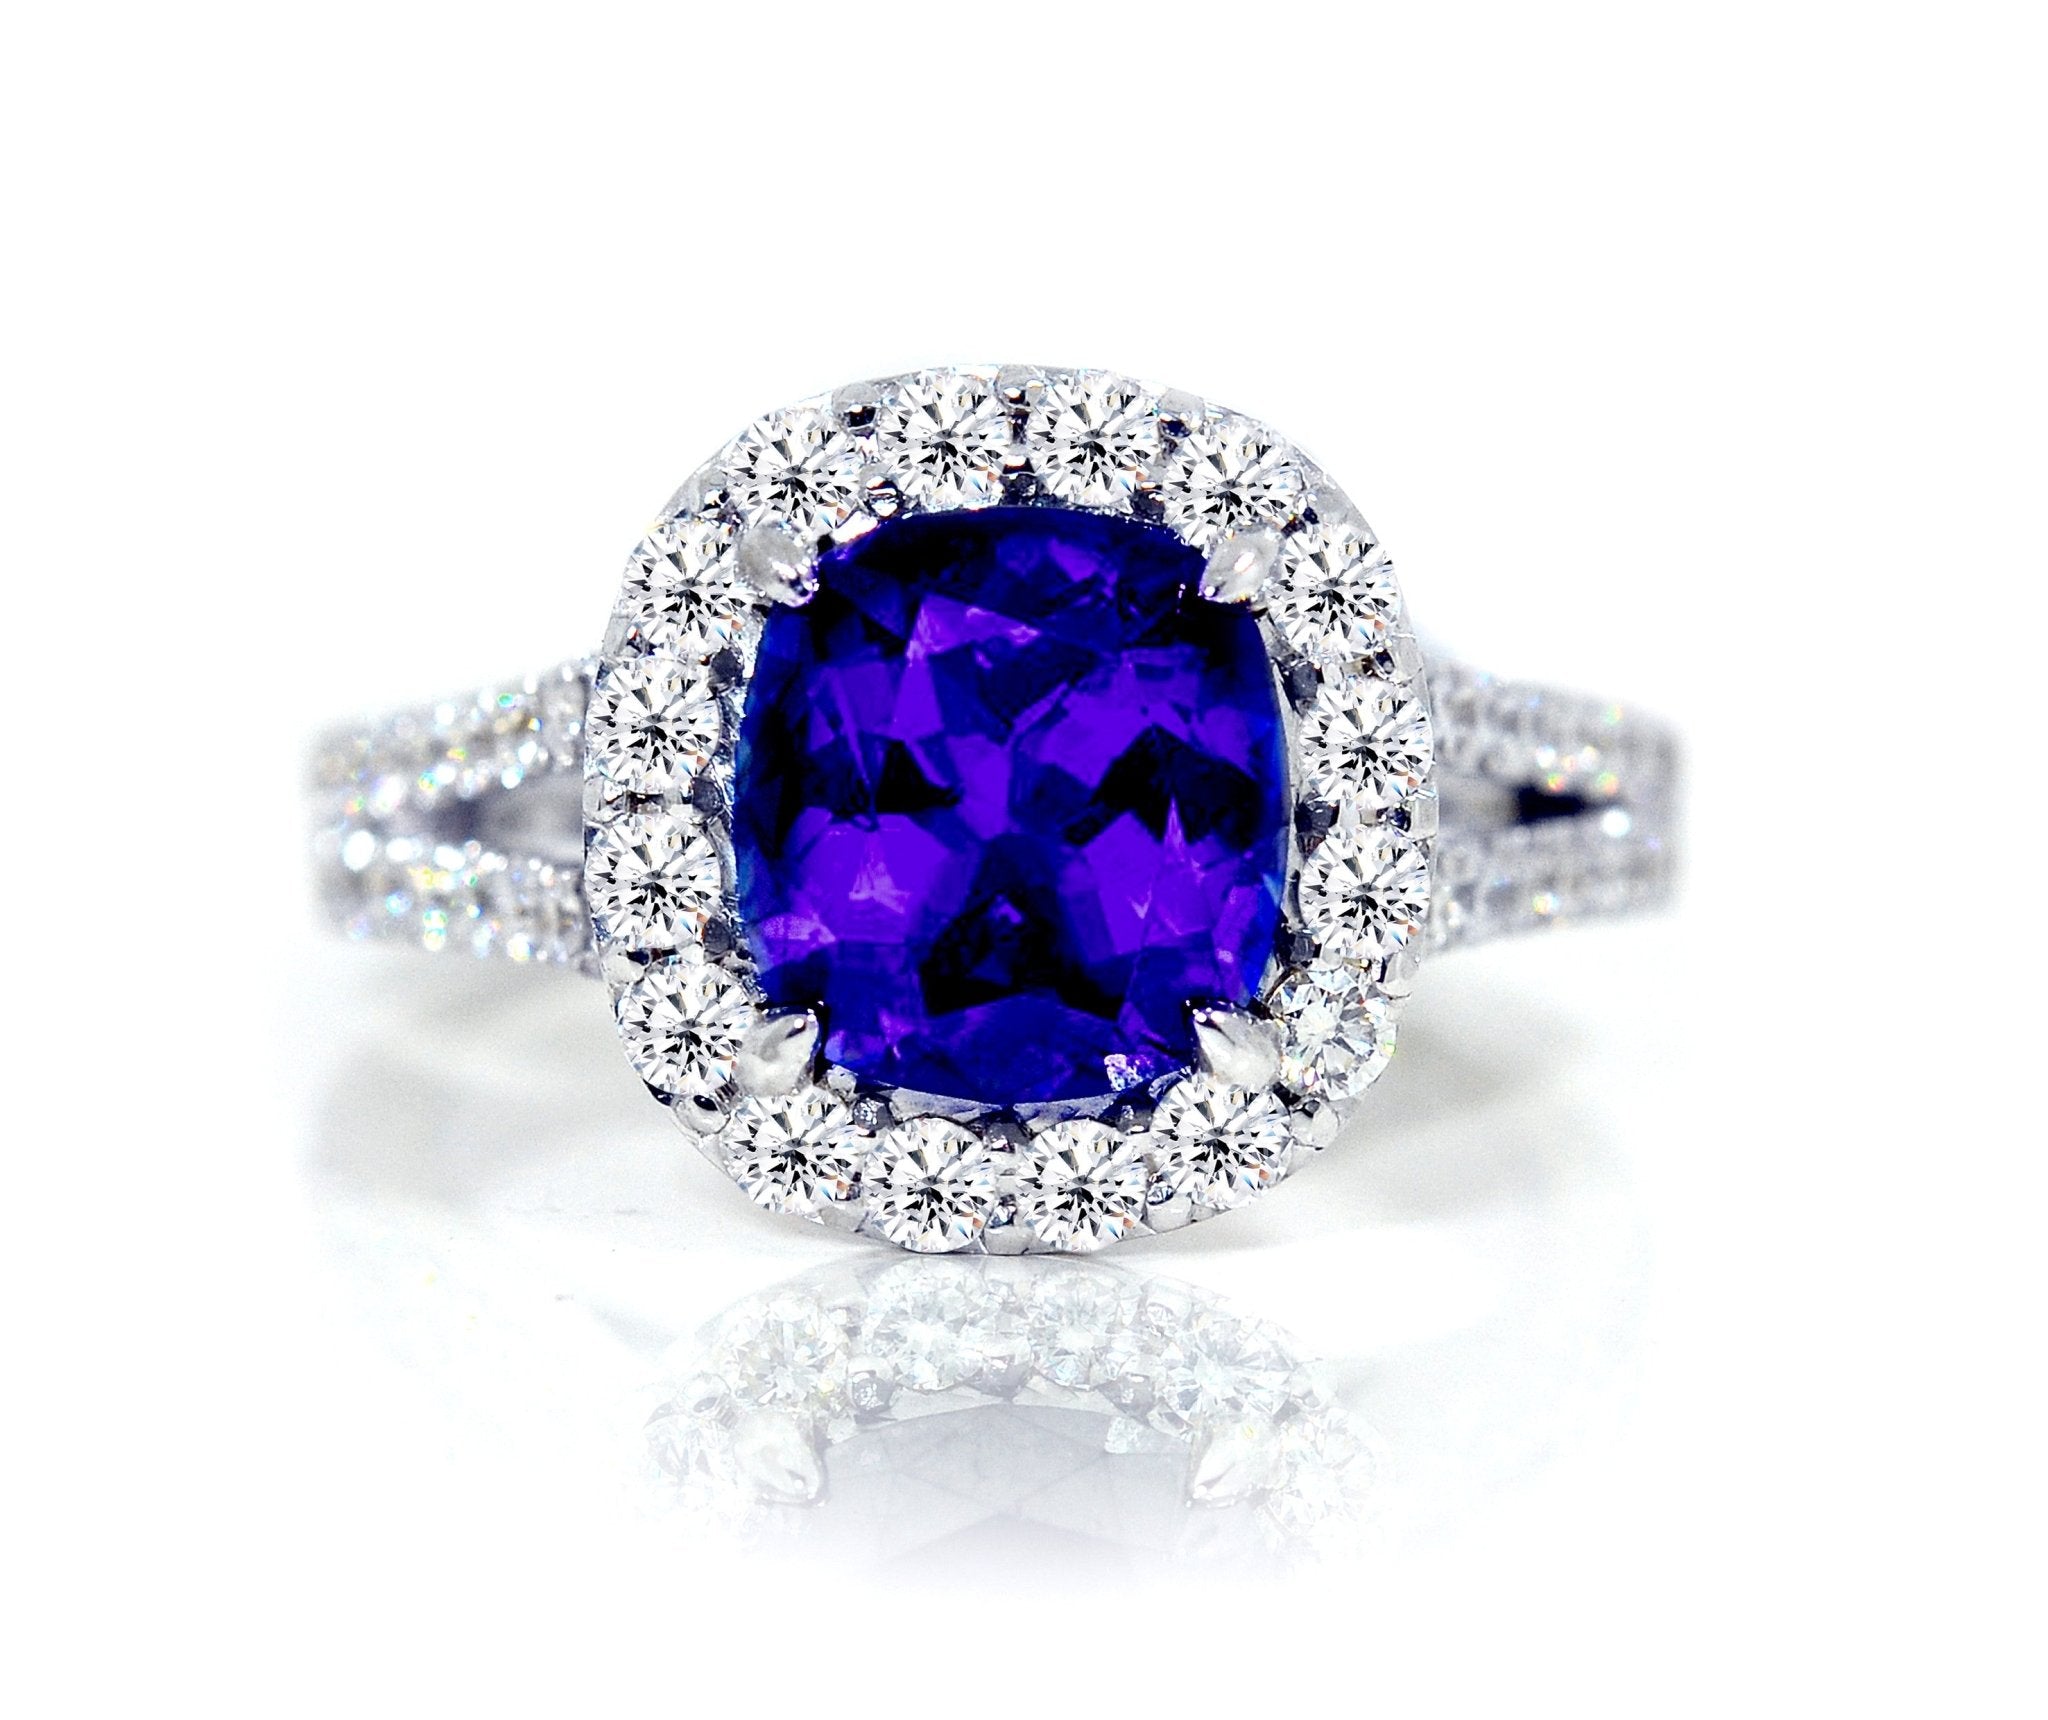 18ct White gold cushion cut tanzanite ring with a halo of diamonds - ForeverJewels Design Studio 8